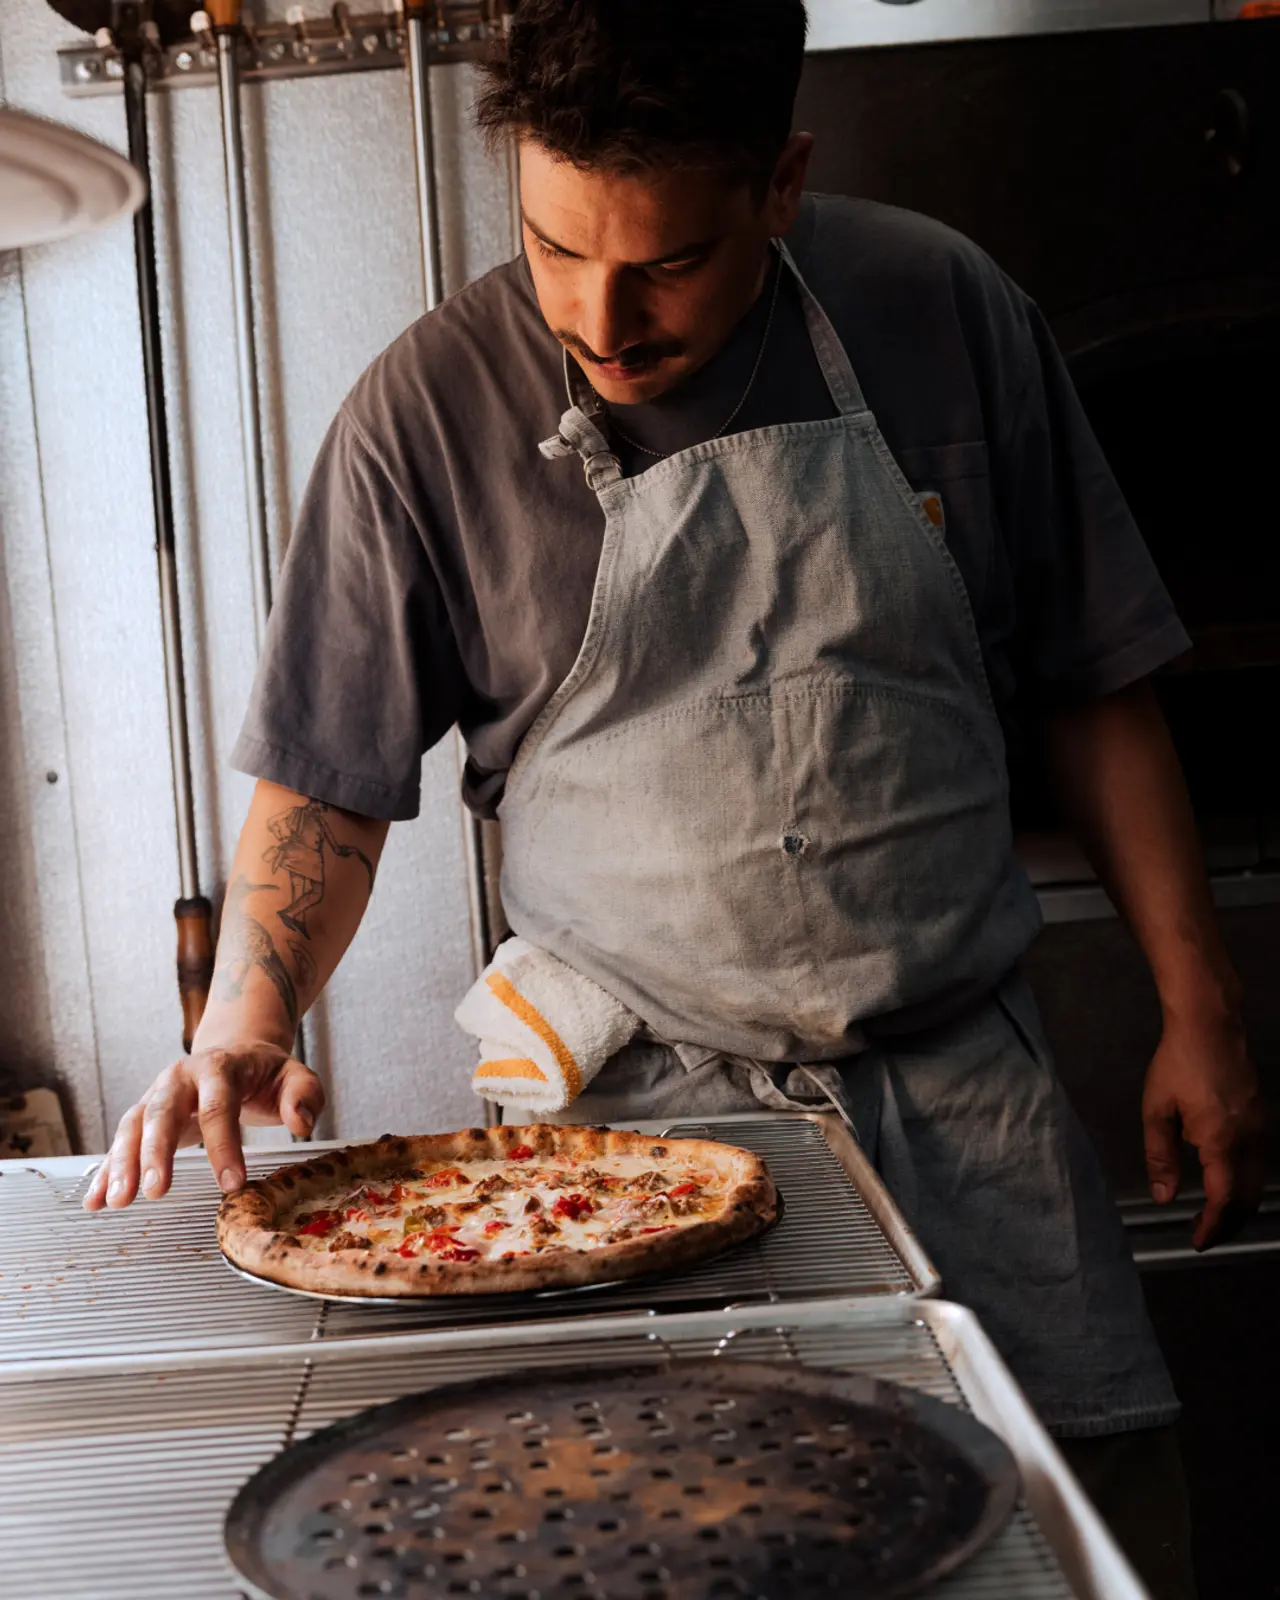 A focused chef is carefully inspecting a freshly baked pizza in a kitchen setting.